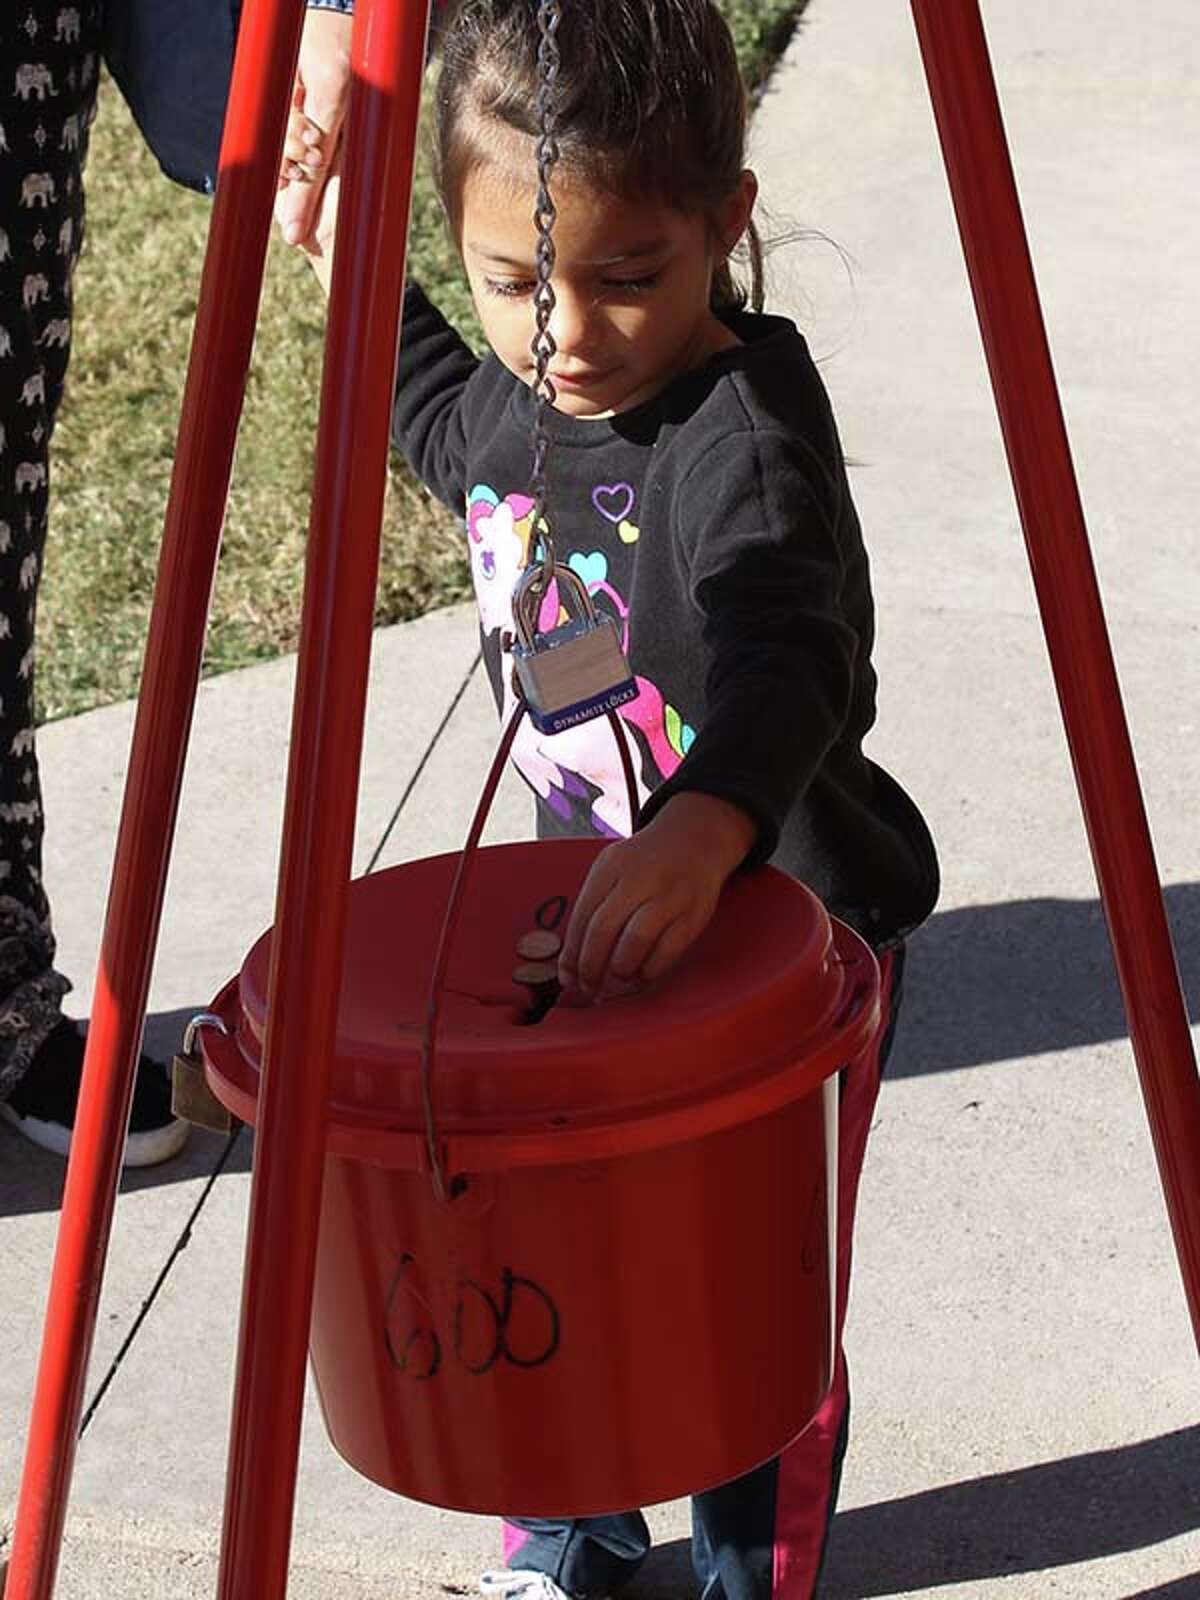 Jubilee Longoria donates to the Salvation Army red kettle.